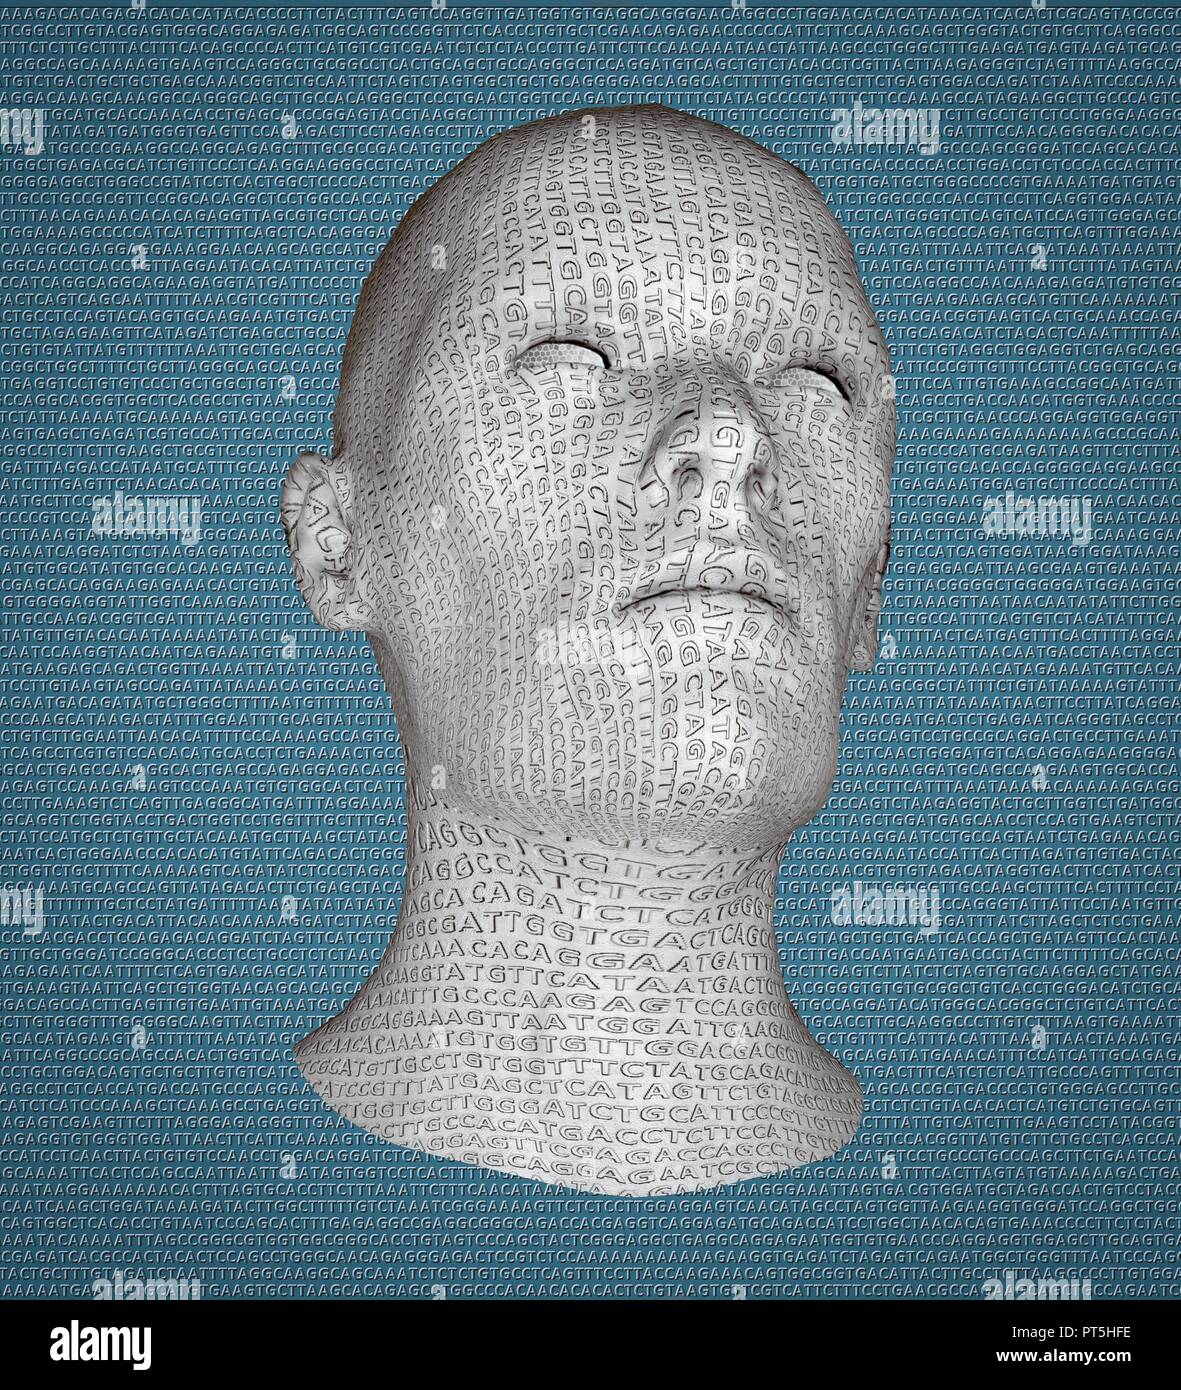 Illustration of an androgynous head engraved with the letters of the DNA (deoxyribonucleic acid) alphabet. The background represents a small section of human DNA. Stock Photo